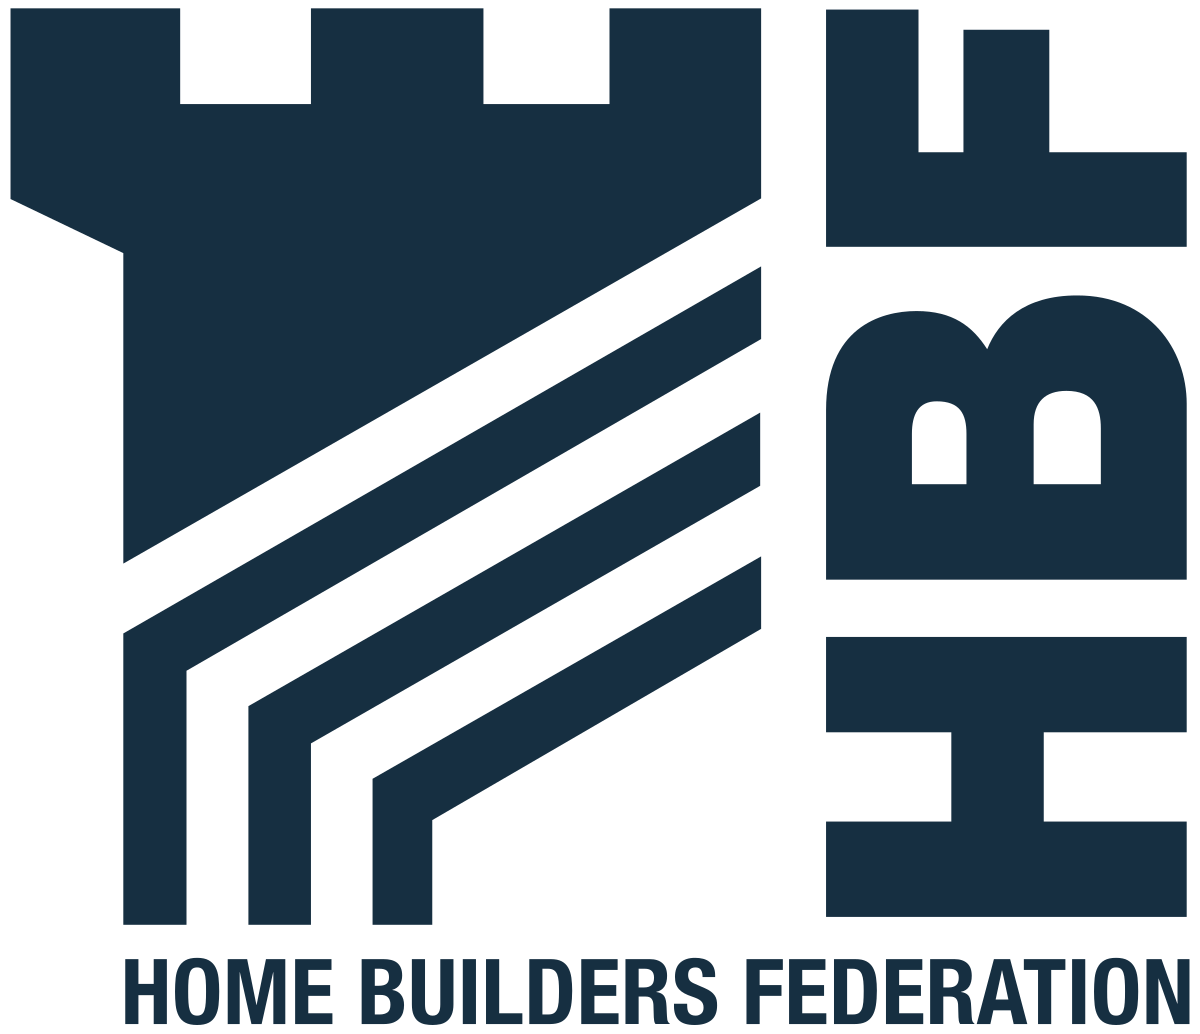 Home Builders Federation UK